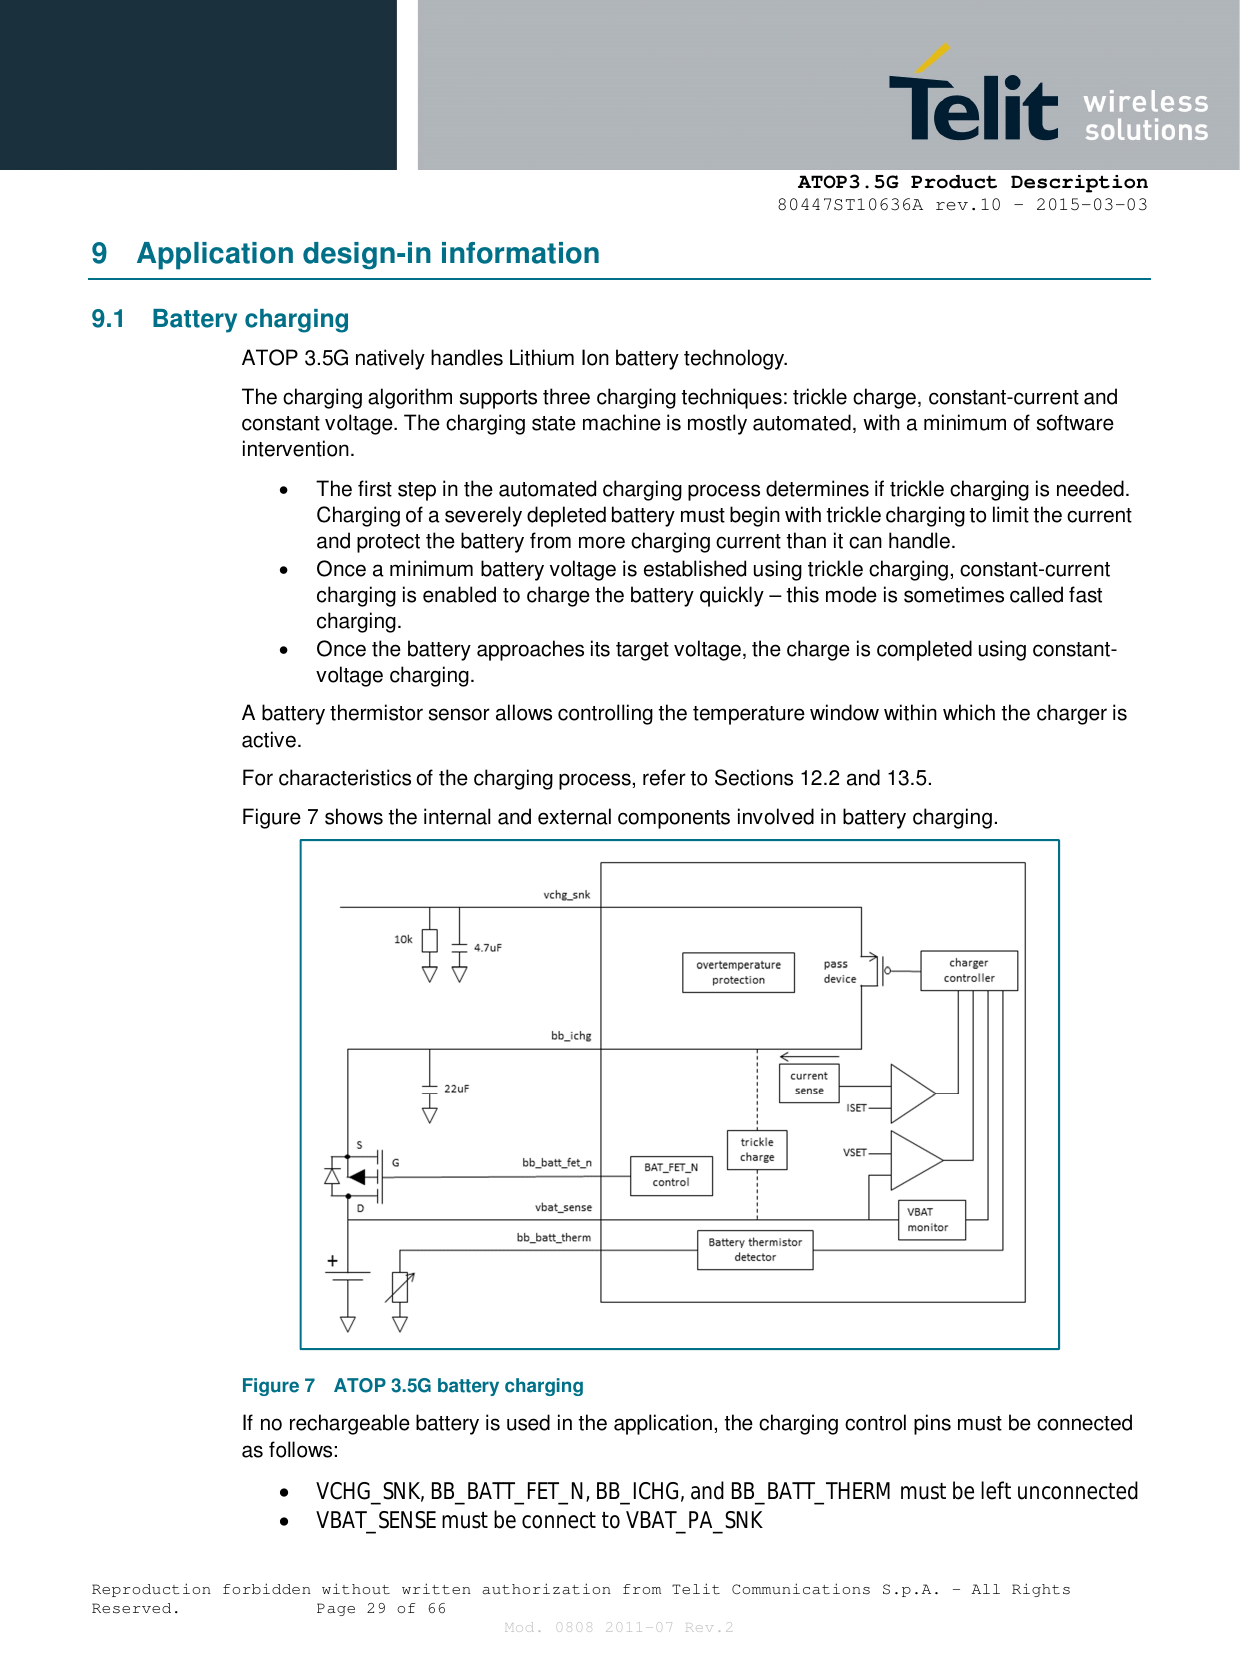      ATOP3.5G Product Description   80447ST10636A rev.10 – 2015-03-03  Reproduction forbidden without written authorization from Telit Communications S.p.A. - All Rights Reserved.    Page 29 of 66 Mod. 0808 2011-07 Rev.2 9  Application design-in information 9.1  Battery charging ATOP 3.5G natively handles Lithium Ion battery technology. The charging algorithm supports three charging techniques: trickle charge, constant-current and constant voltage. The charging state machine is mostly automated, with a minimum of software intervention.   The first step in the automated charging process determines if trickle charging is needed. Charging of a severely depleted battery must begin with trickle charging to limit the current and protect the battery from more charging current than it can handle.   Once a minimum battery voltage is established using trickle charging, constant-current charging is enabled to charge the battery quickly – this mode is sometimes called fast charging.   Once the battery approaches its target voltage, the charge is completed using constant-voltage charging. A battery thermistor sensor allows controlling the temperature window within which the charger is active. For characteristics of the charging process, refer to Sections 12.2 and 13.5. Figure 7 shows the internal and external components involved in battery charging. Figure 7  ATOP 3.5G battery charging If no rechargeable battery is used in the application, the charging control pins must be connected as follows:  VCHG_SNK, BB_BATT_FET_N, BB_ICHG, and BB_BATT_THERM must be left unconnected   VBAT_SENSE must be connect to VBAT_PA_SNK 